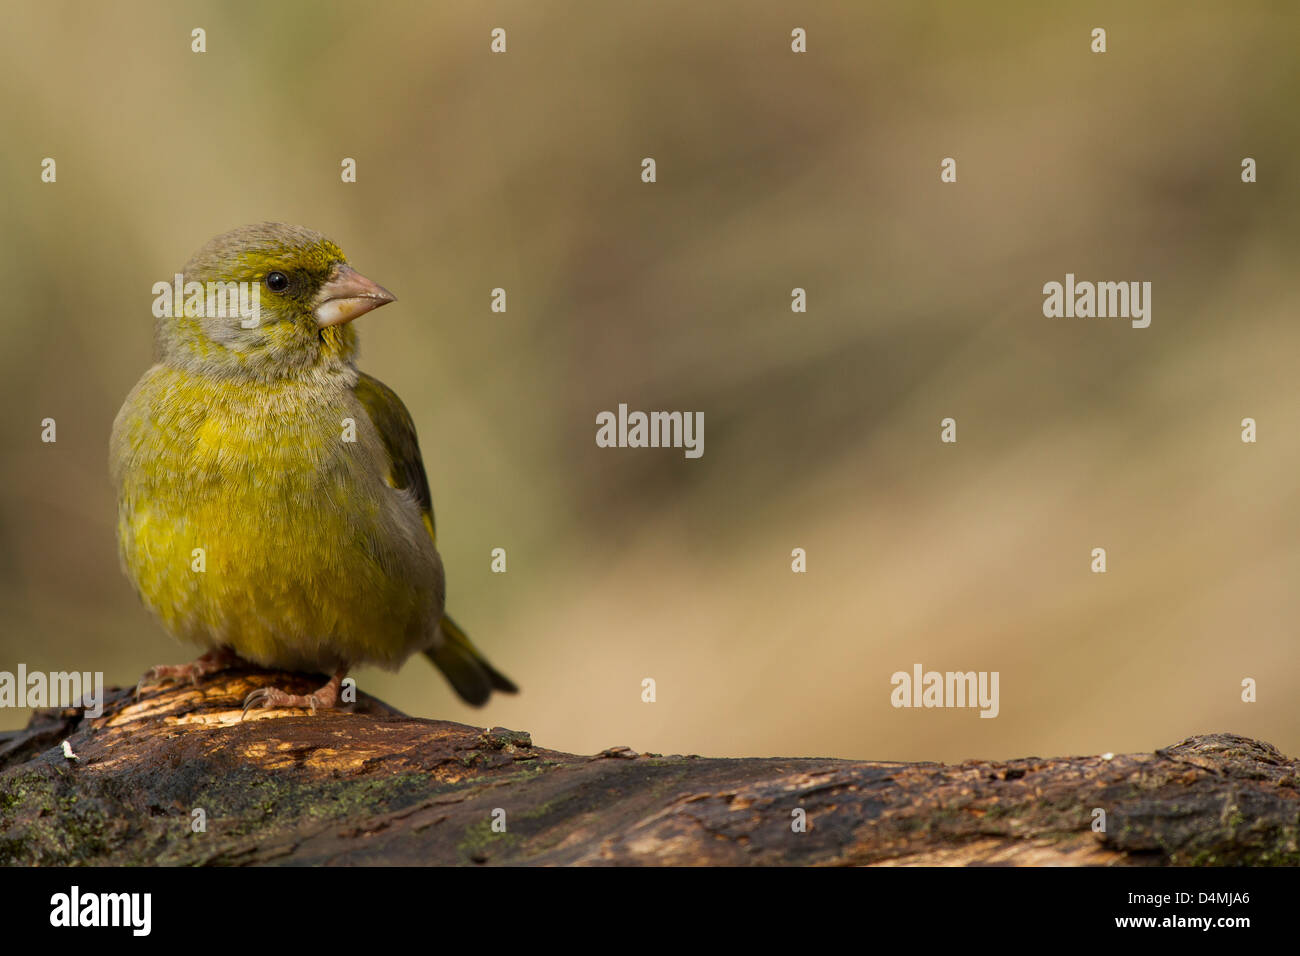 The Green Finch is a fringillidae, he is on the branch watching around. Stock Photo